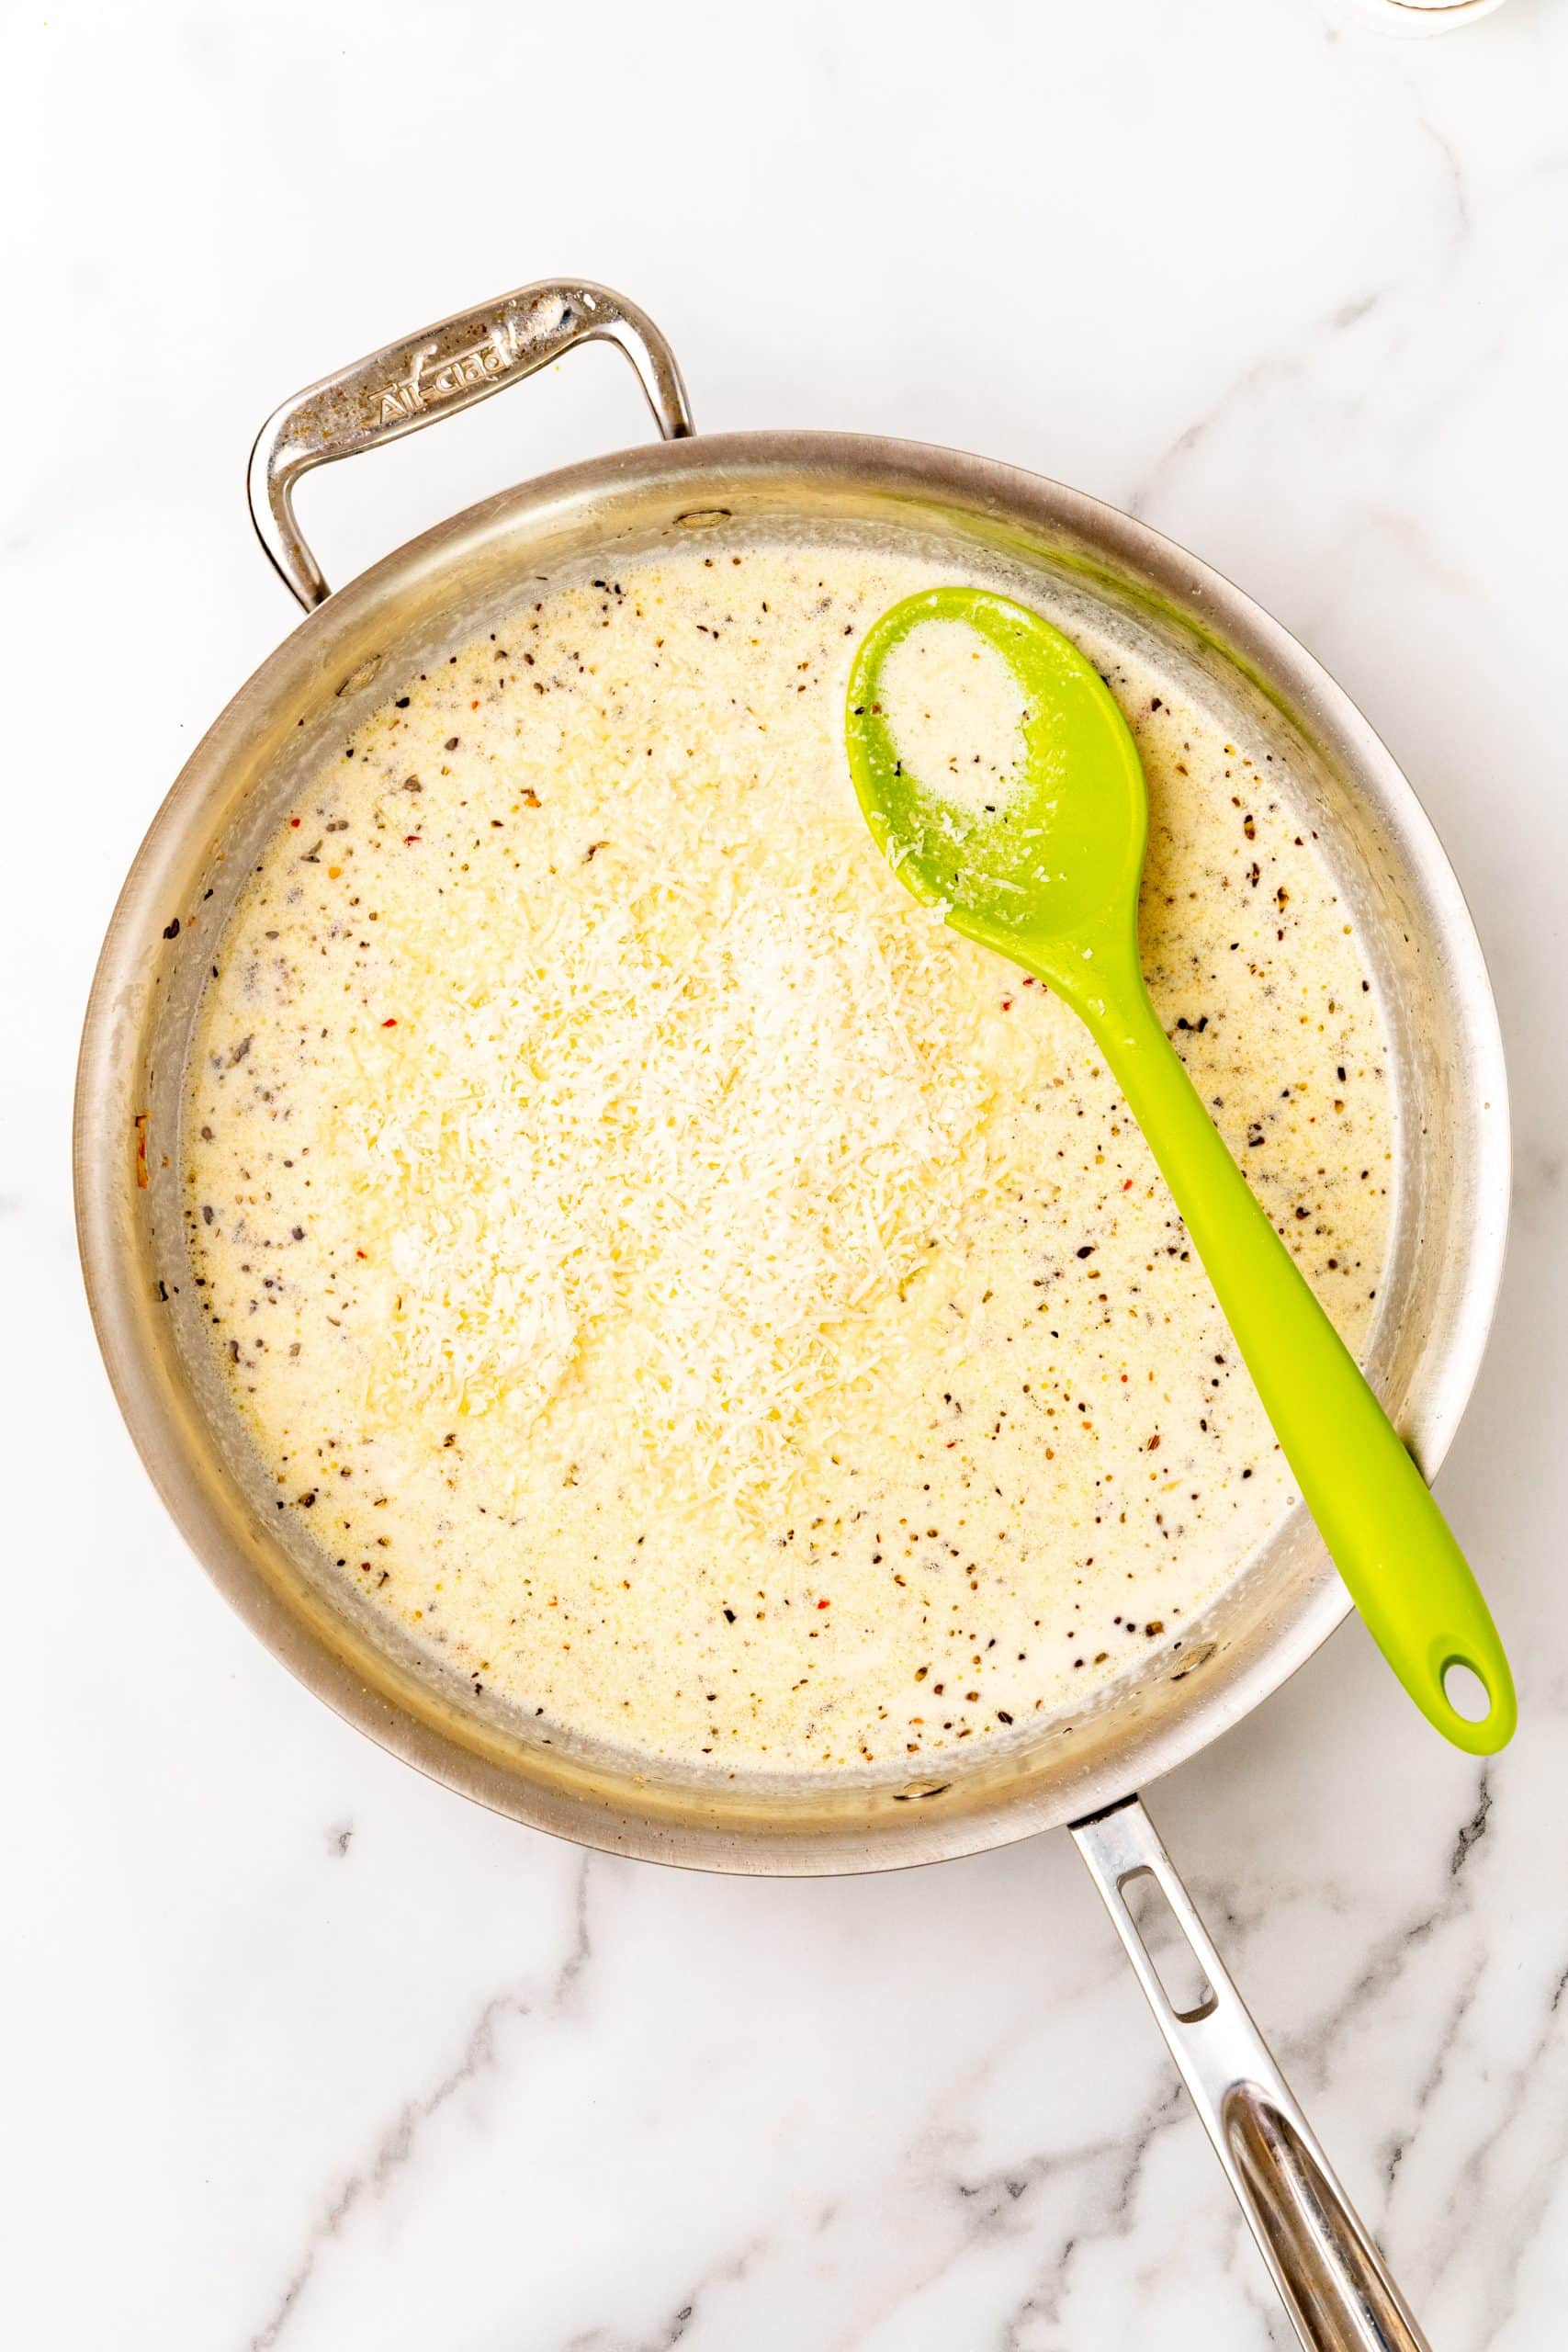 parmesan cheese added to a large silver skillet filled with a creamy garlic butter scampi sauce